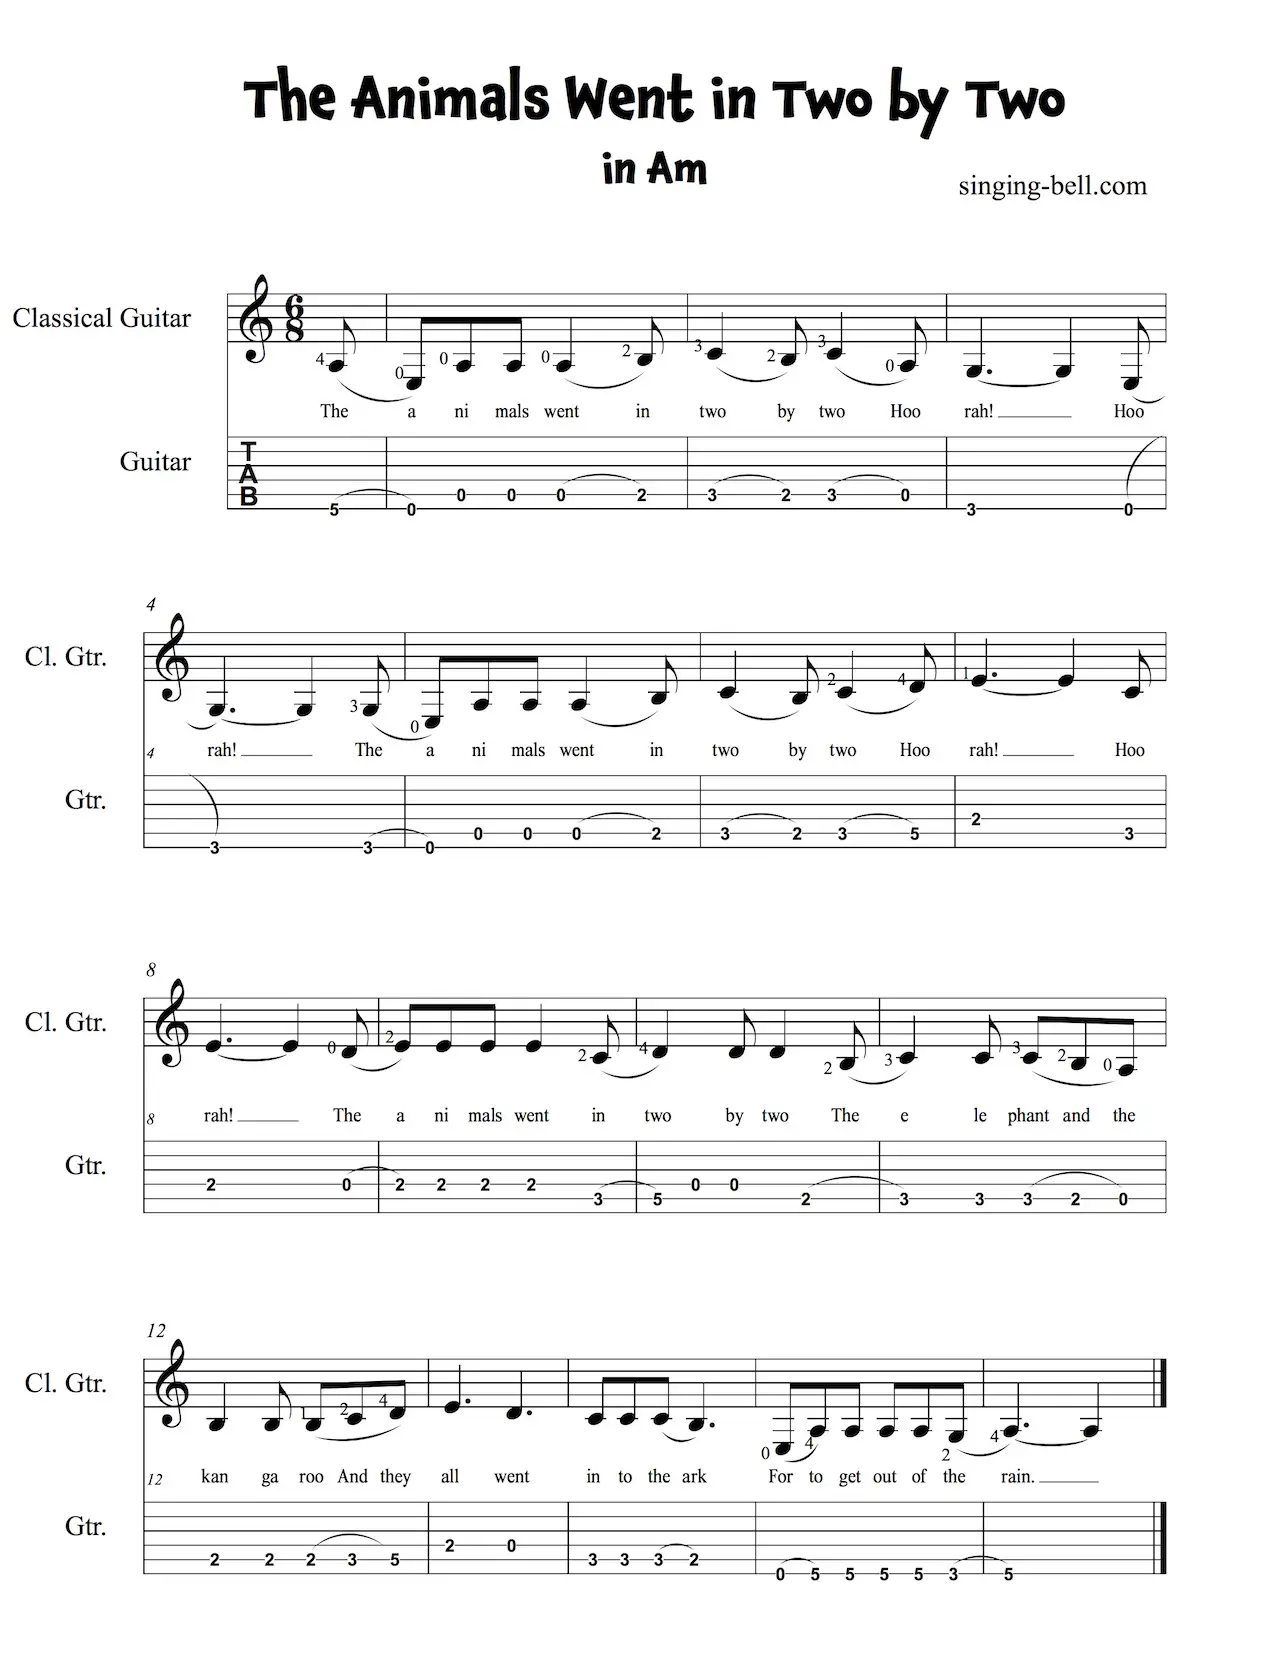 The Animals Went in Two by Two Easy Guitar Sheet Music with notes and tablature in Am.